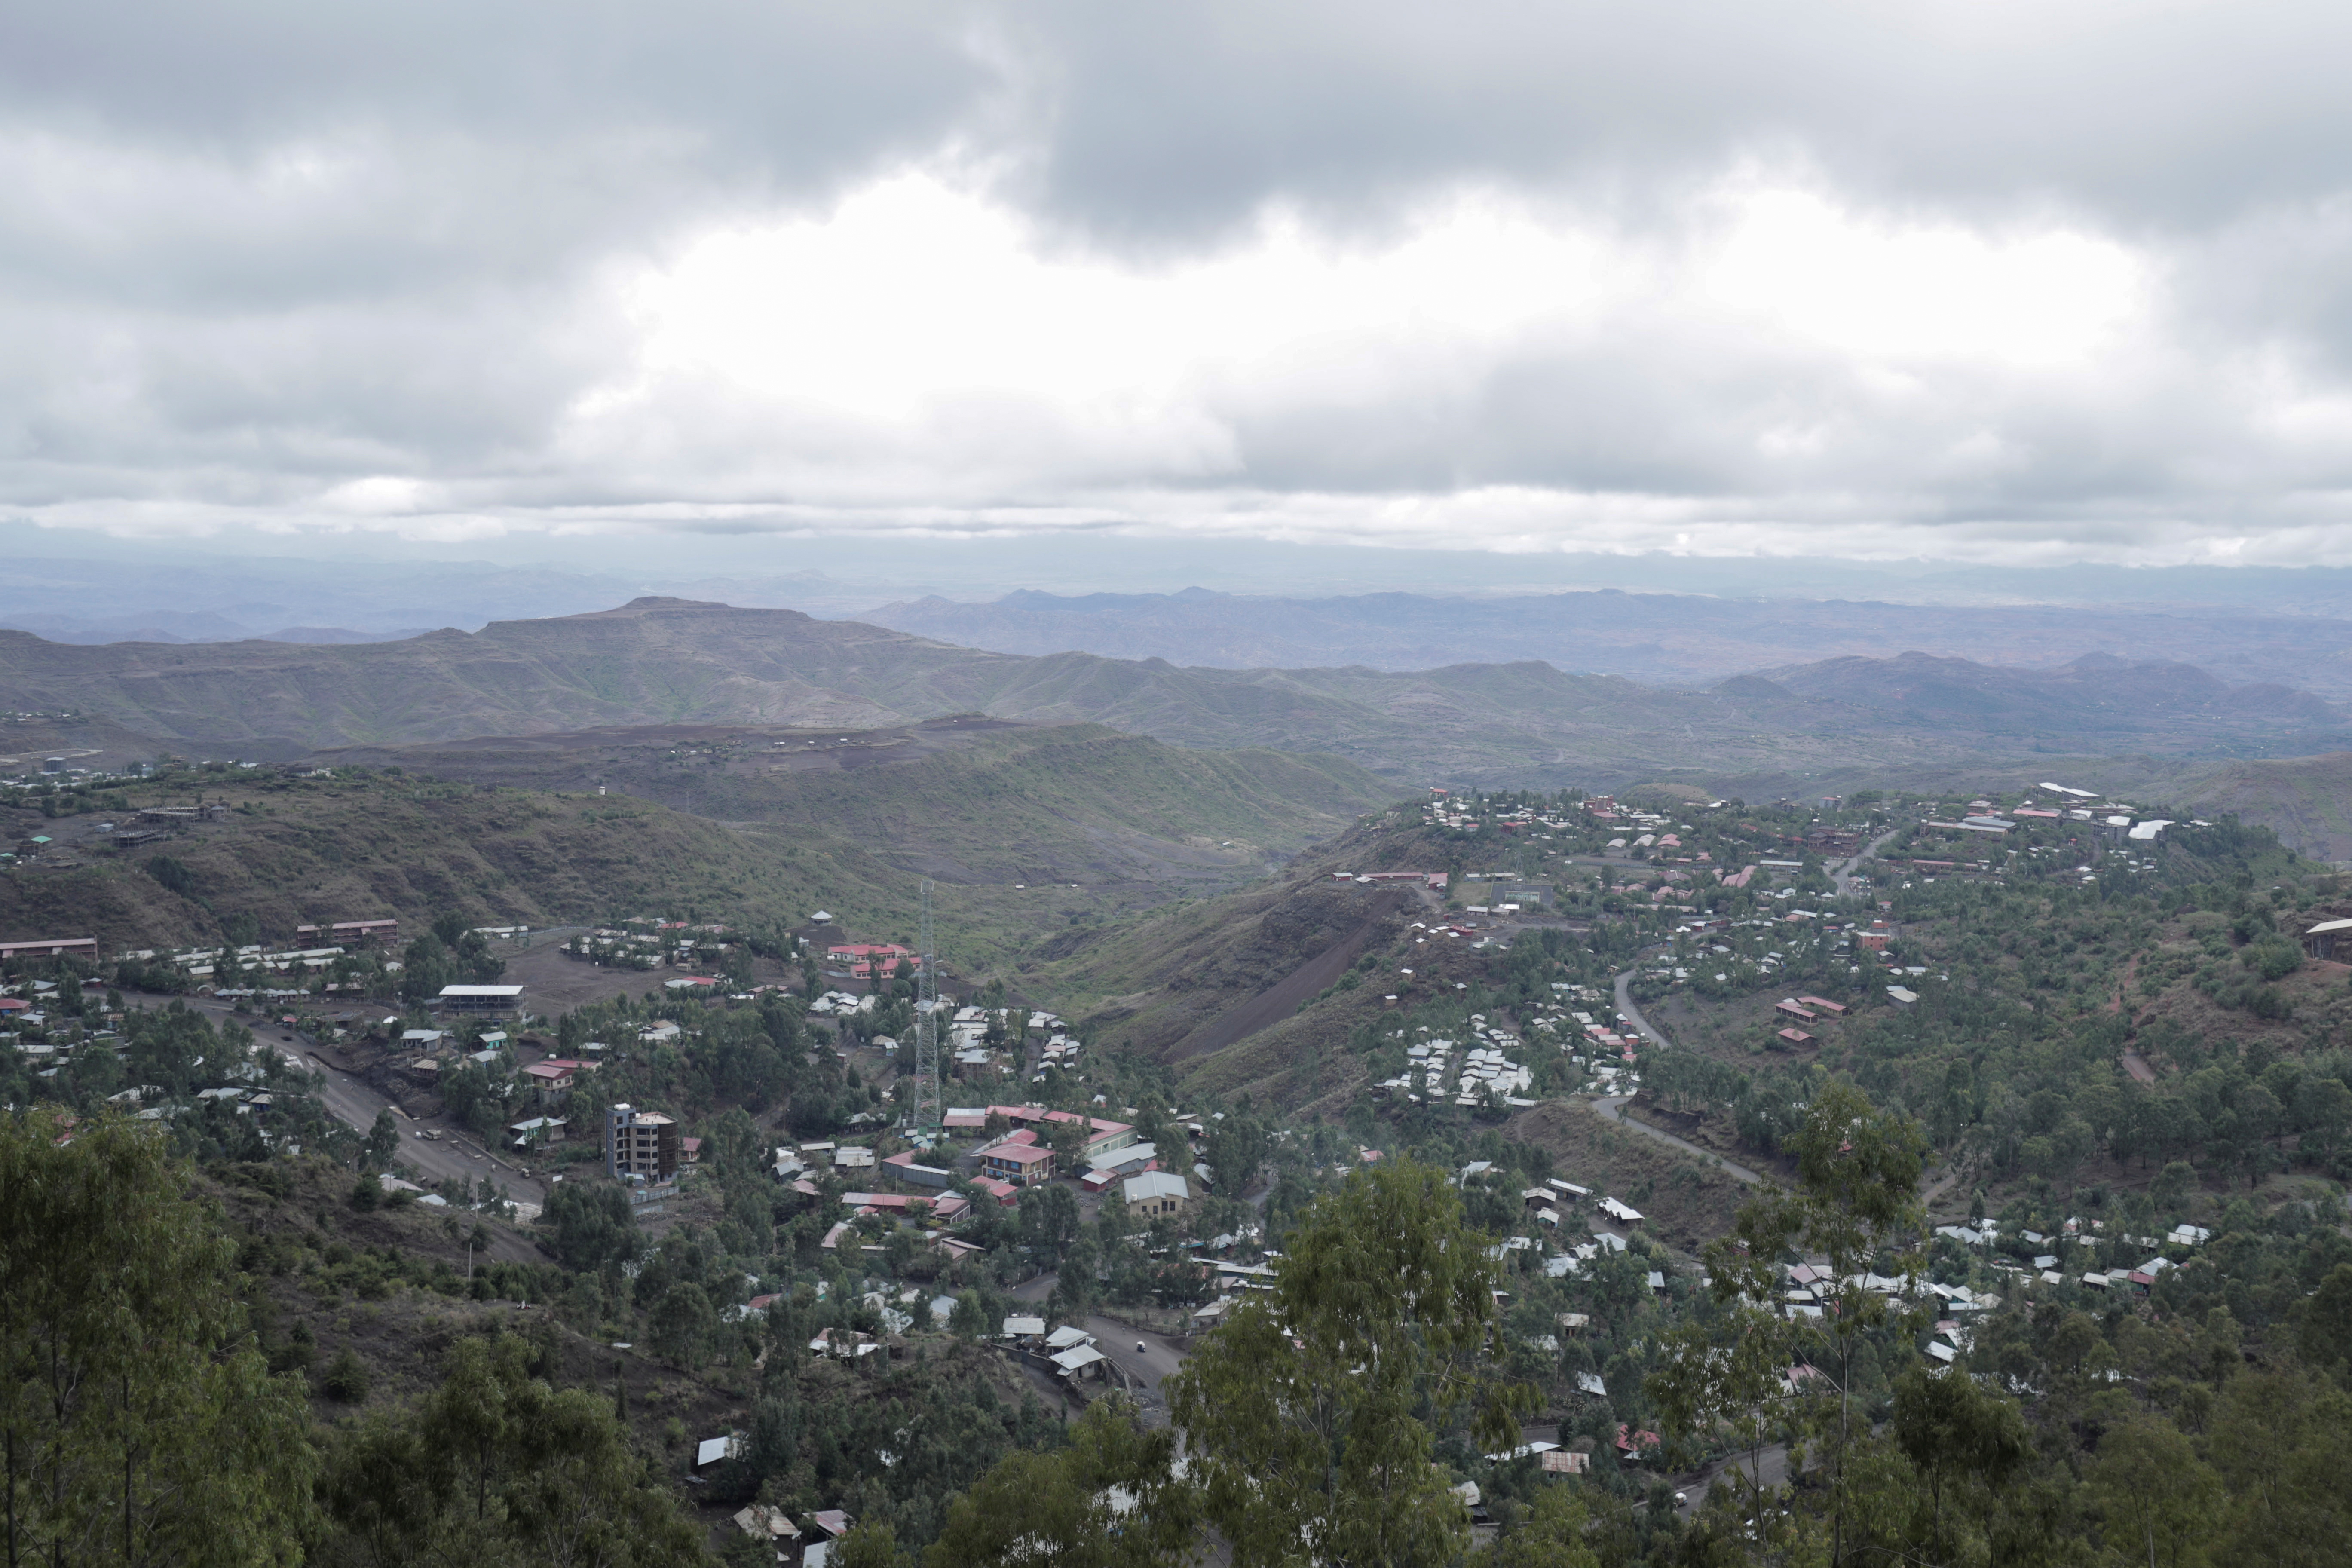 General view of the town of Lalibela